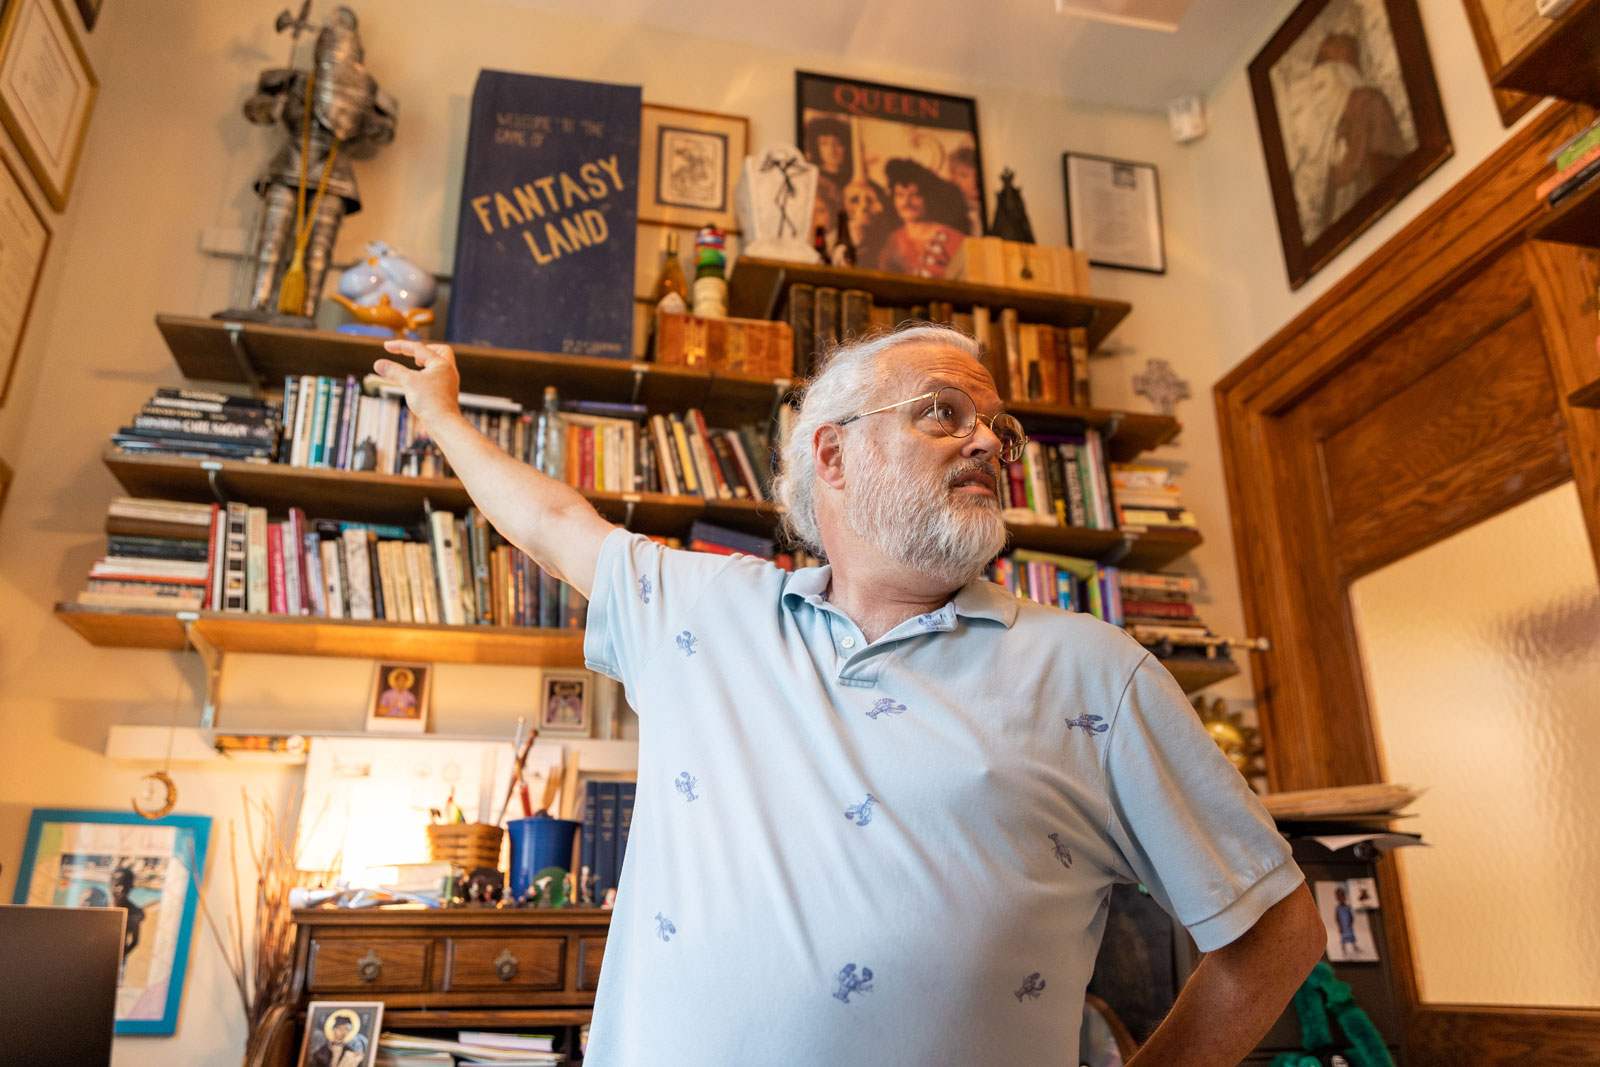 The office of Fred Porcheddu-Engel is filled with books, toys, and trinkets given to him by students over the past 30 years.